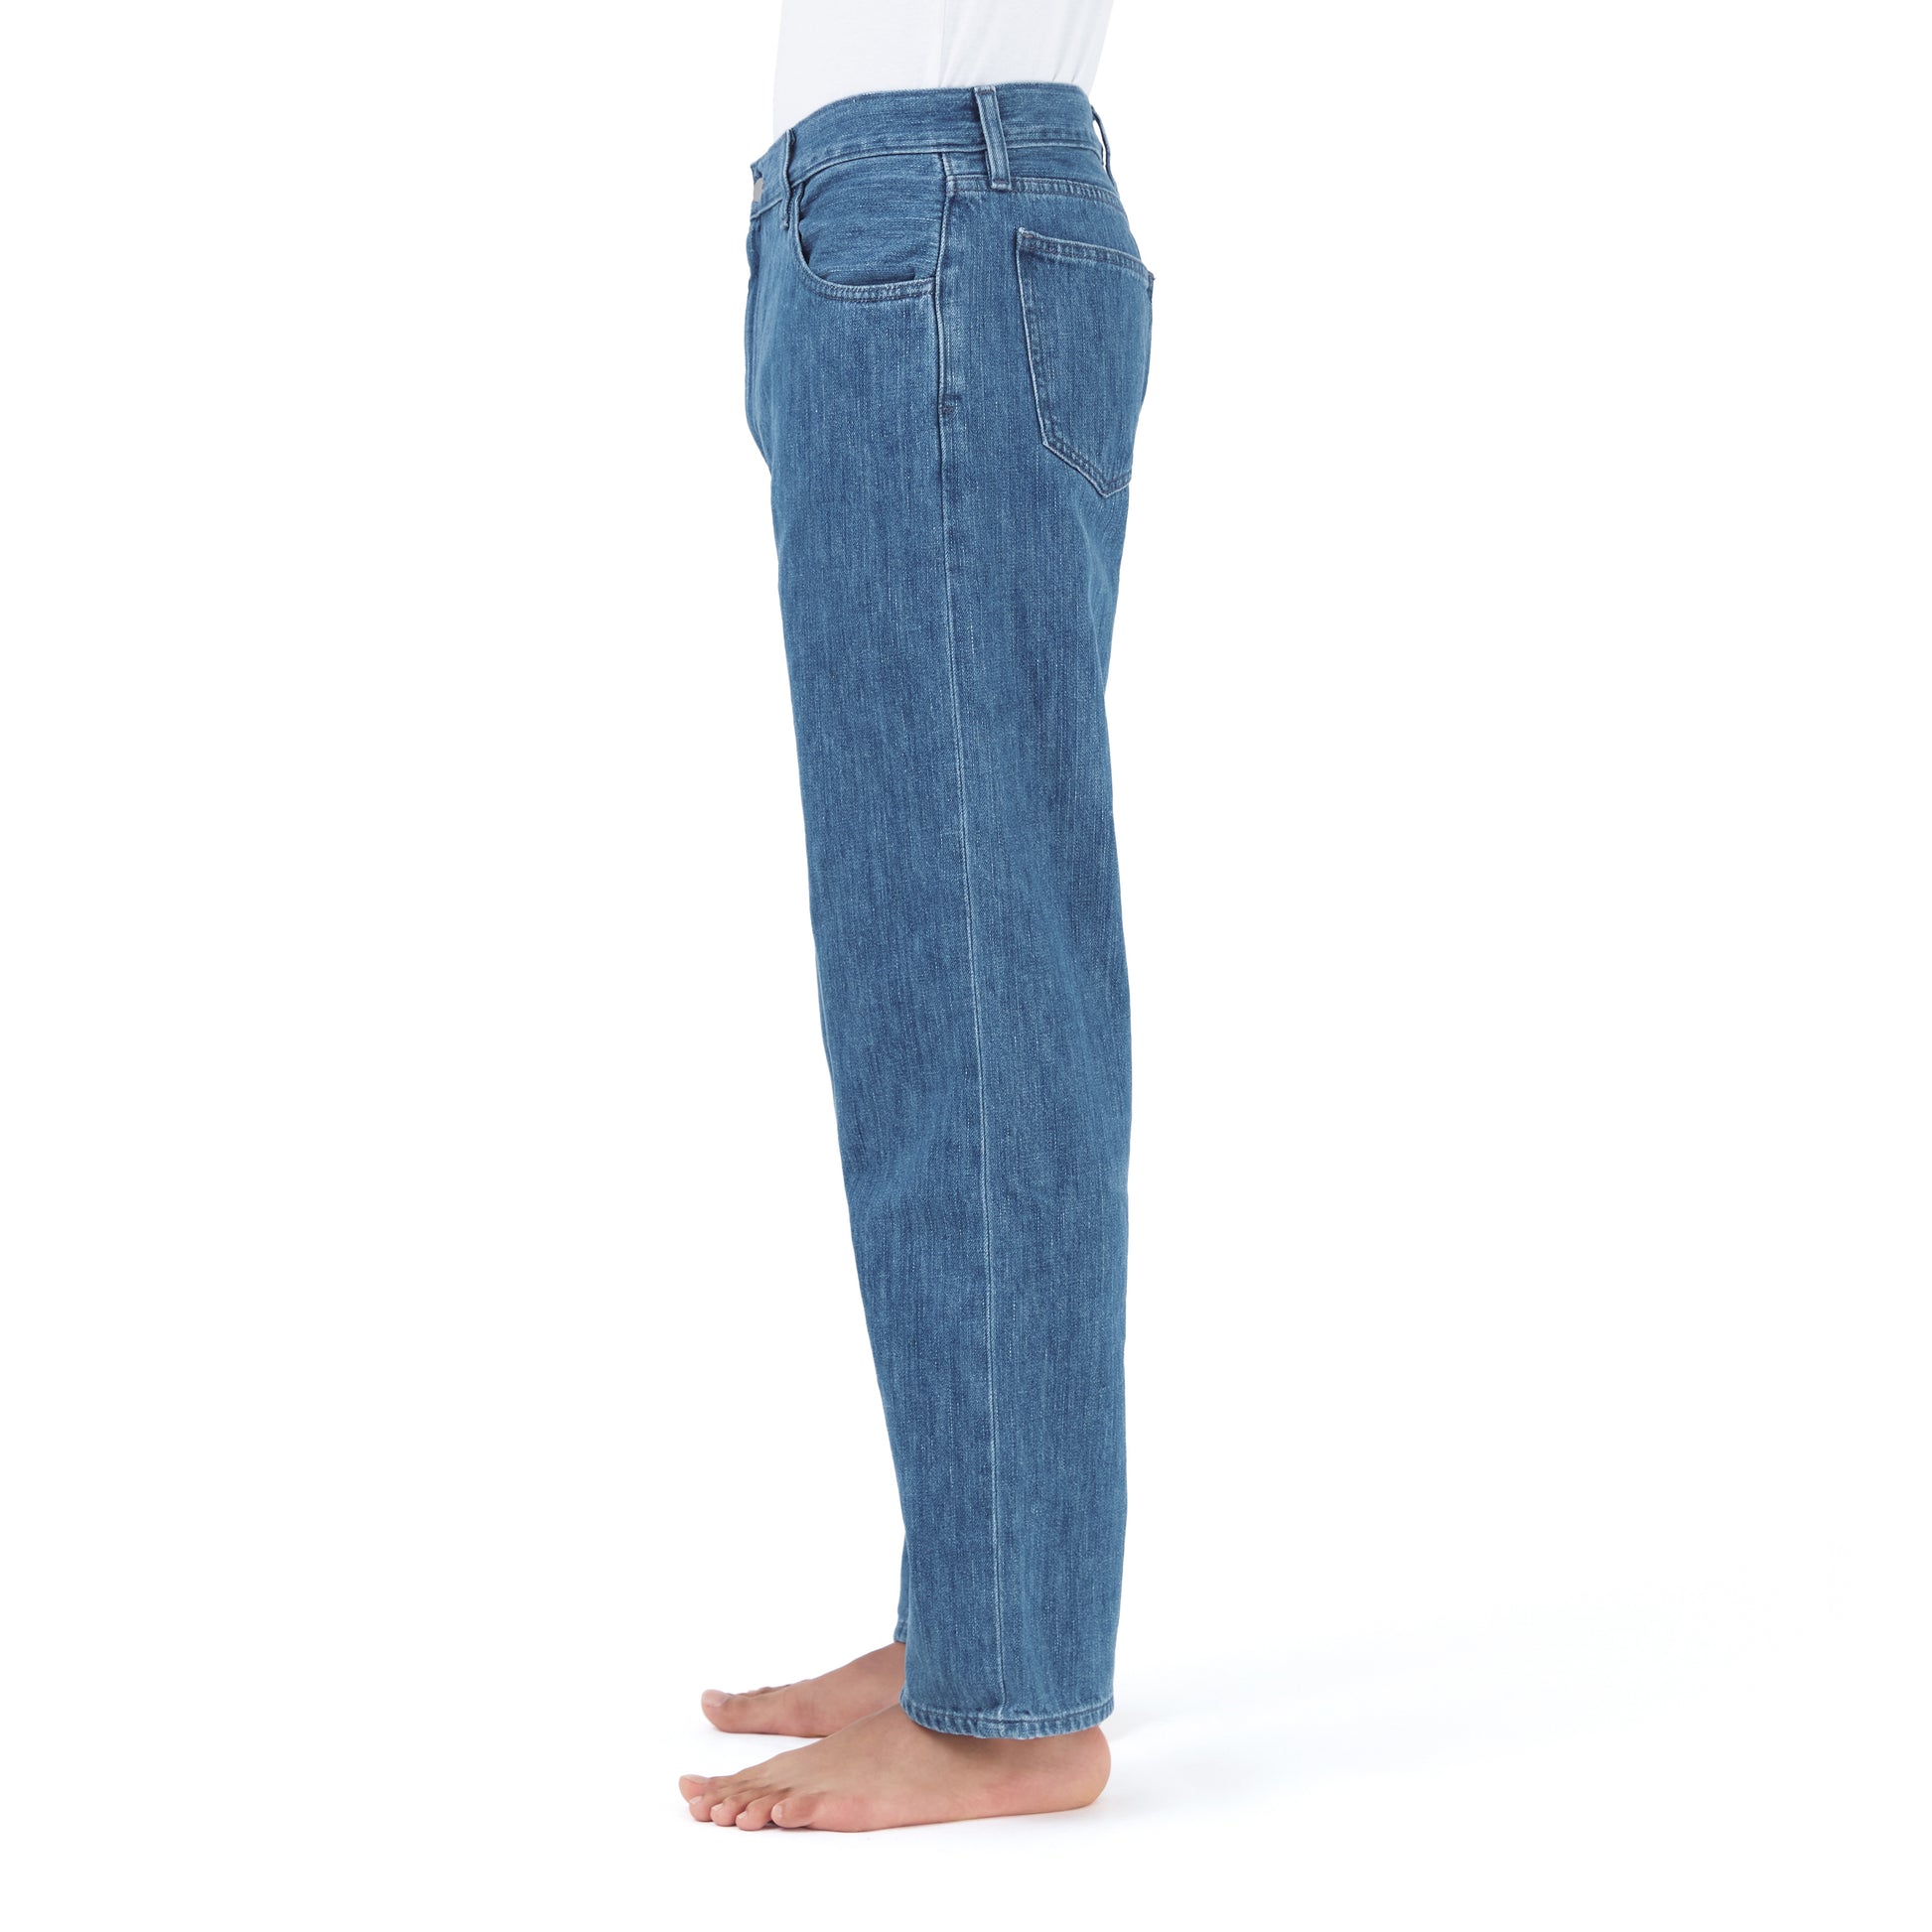 Relaxed Fit Organic Jean in Eco Stone Wash Selvedge Denim – non